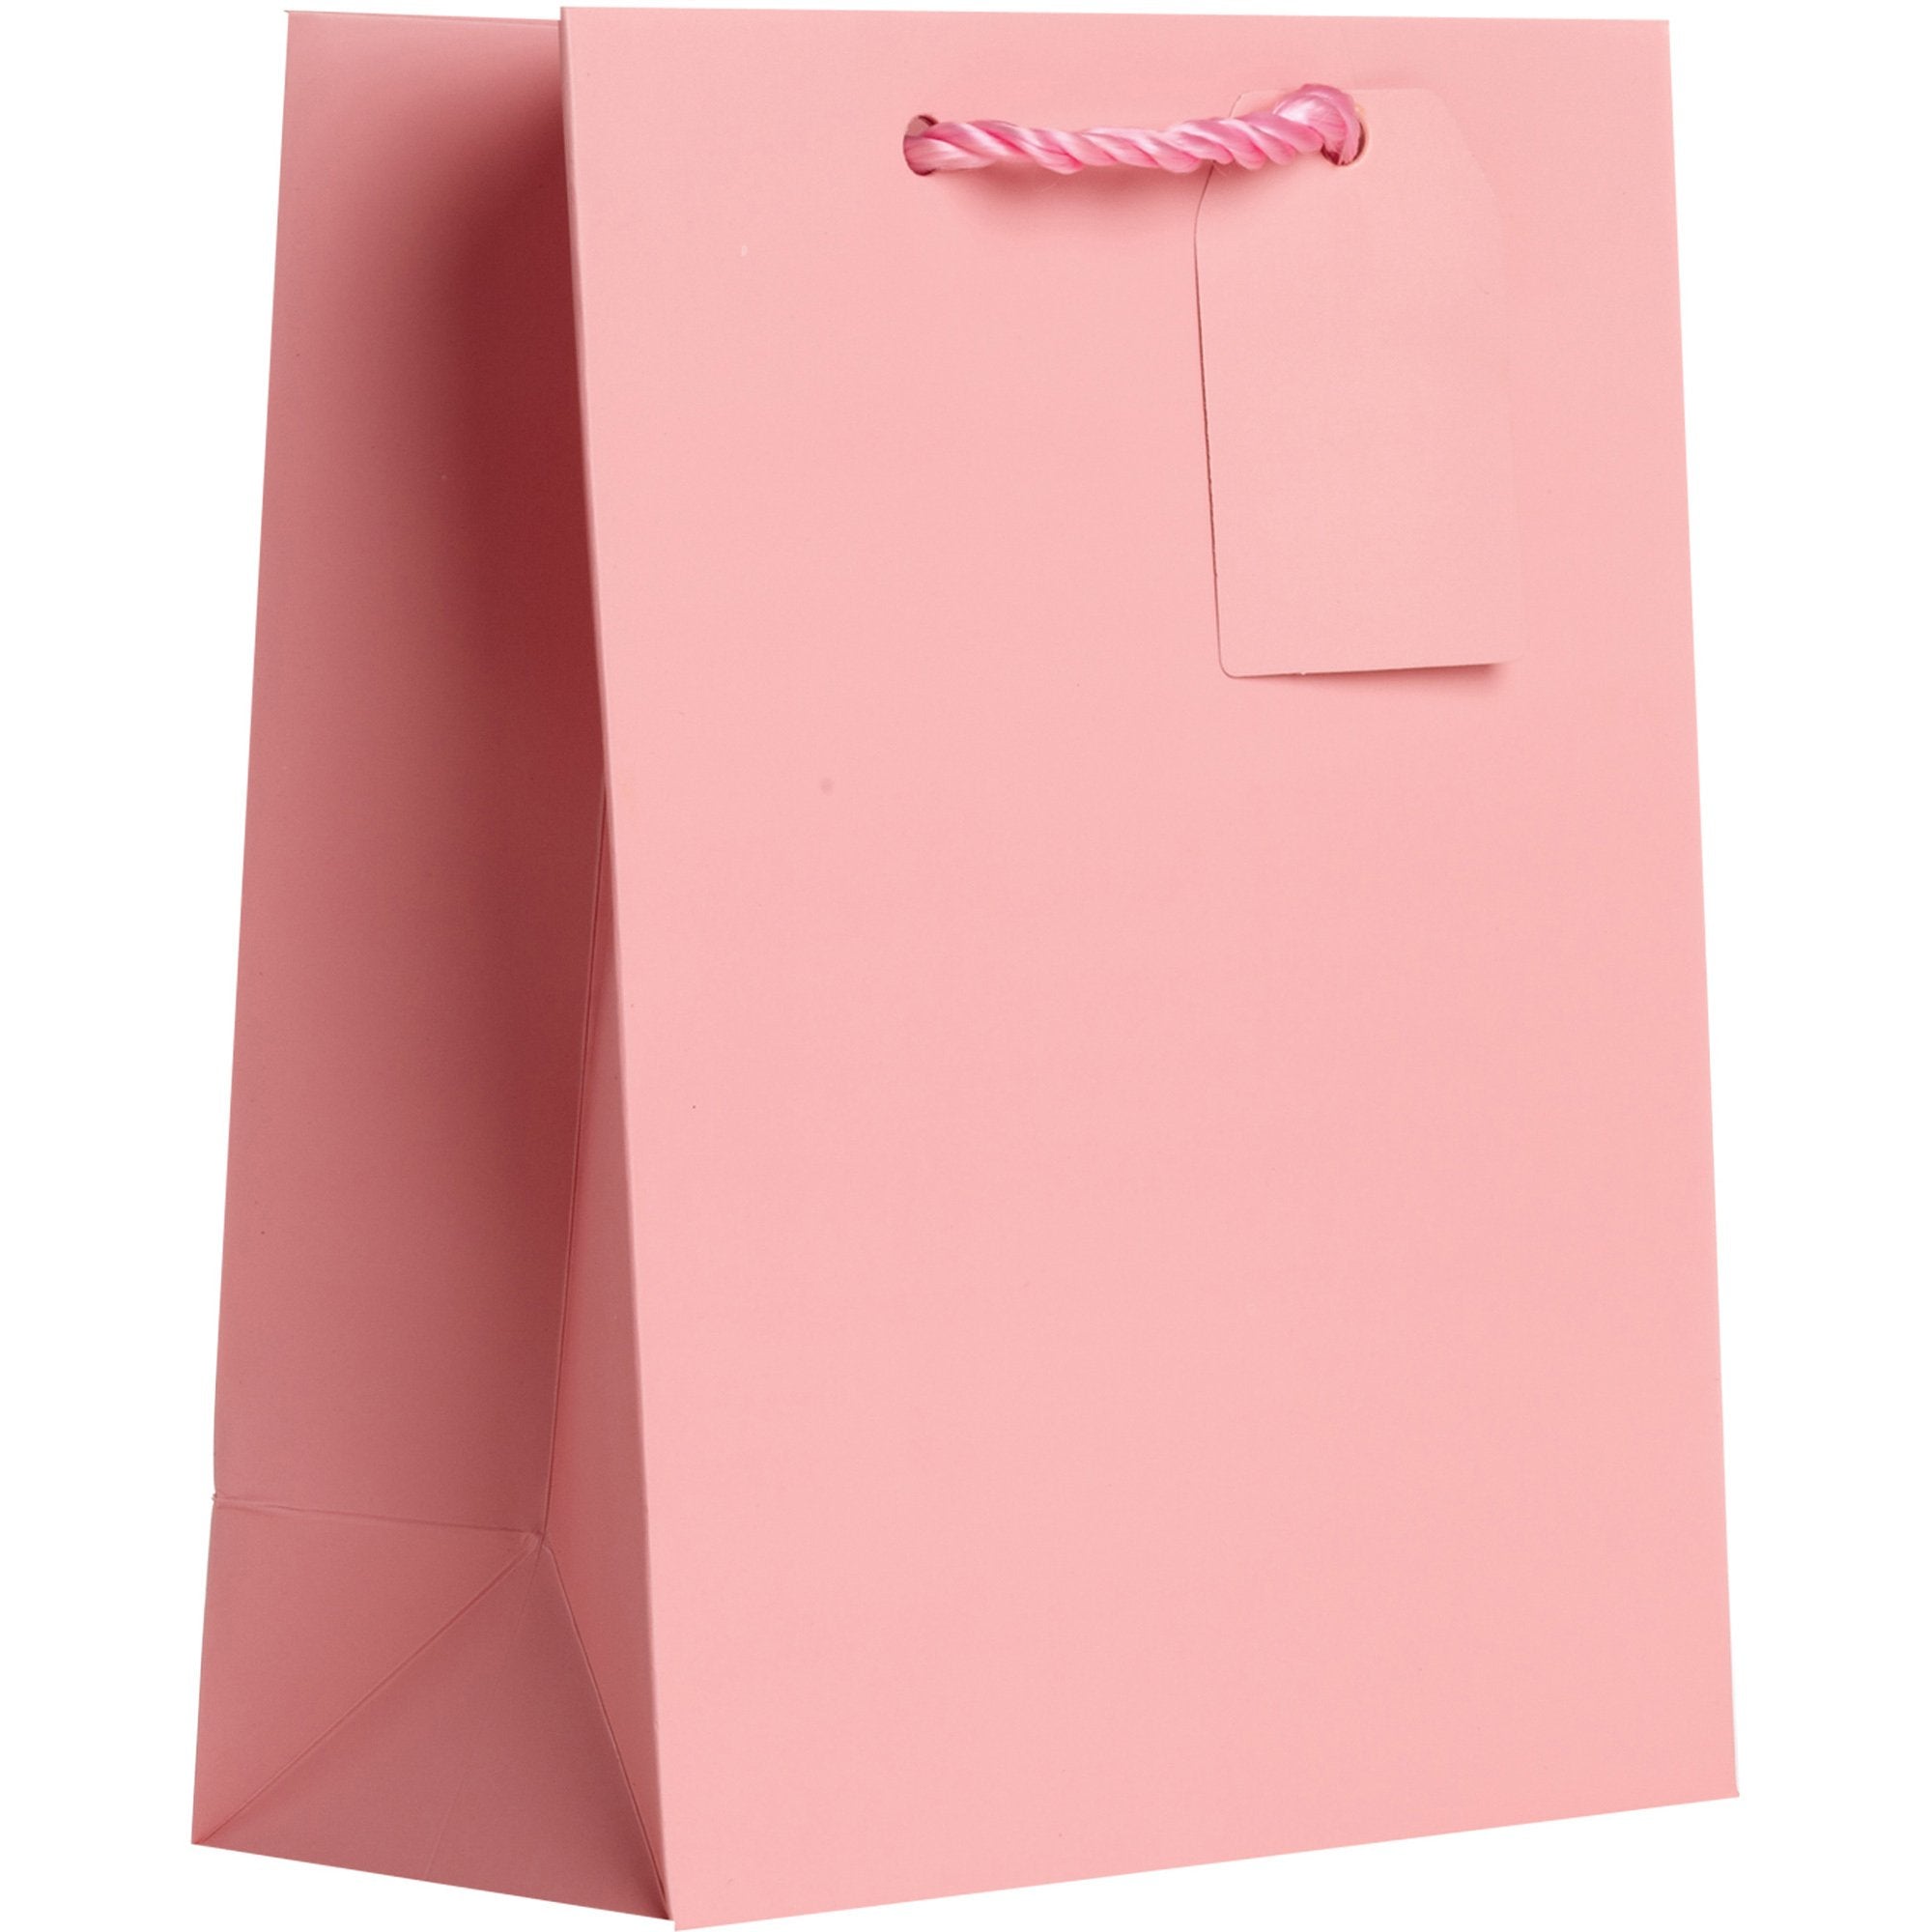 Heavyweight Solid Color Medium Gift Bags, Matte Pastel Pink